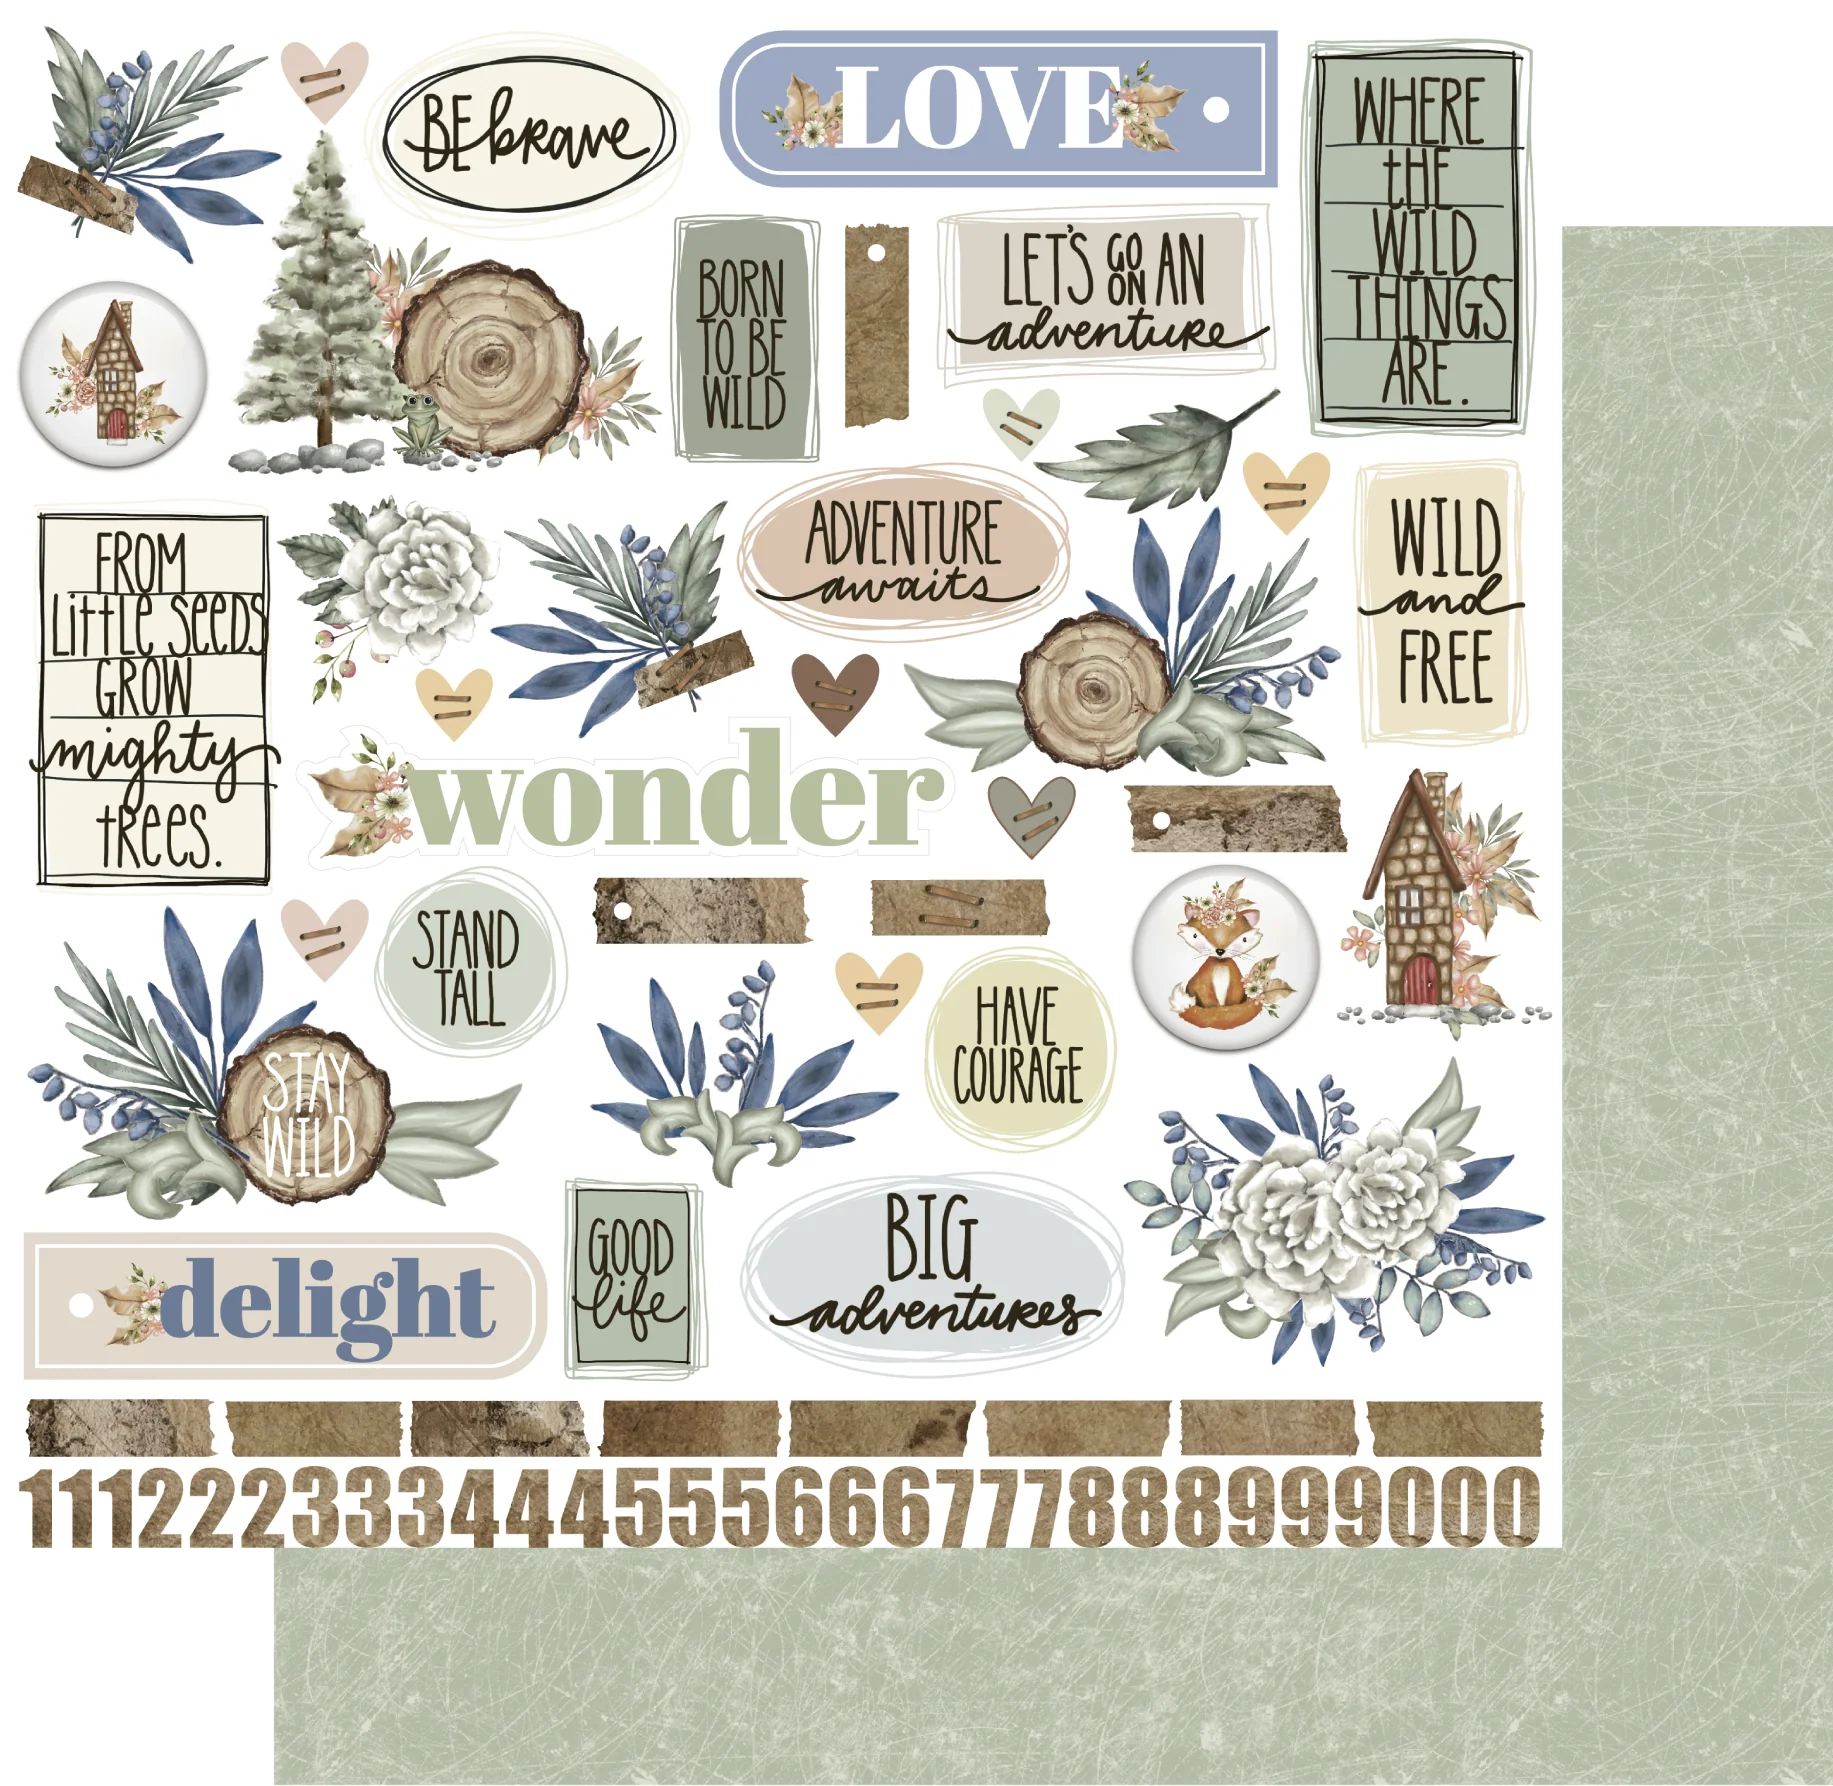 Uniquely Creative - 12x12 Collection Pack - Into the Wild